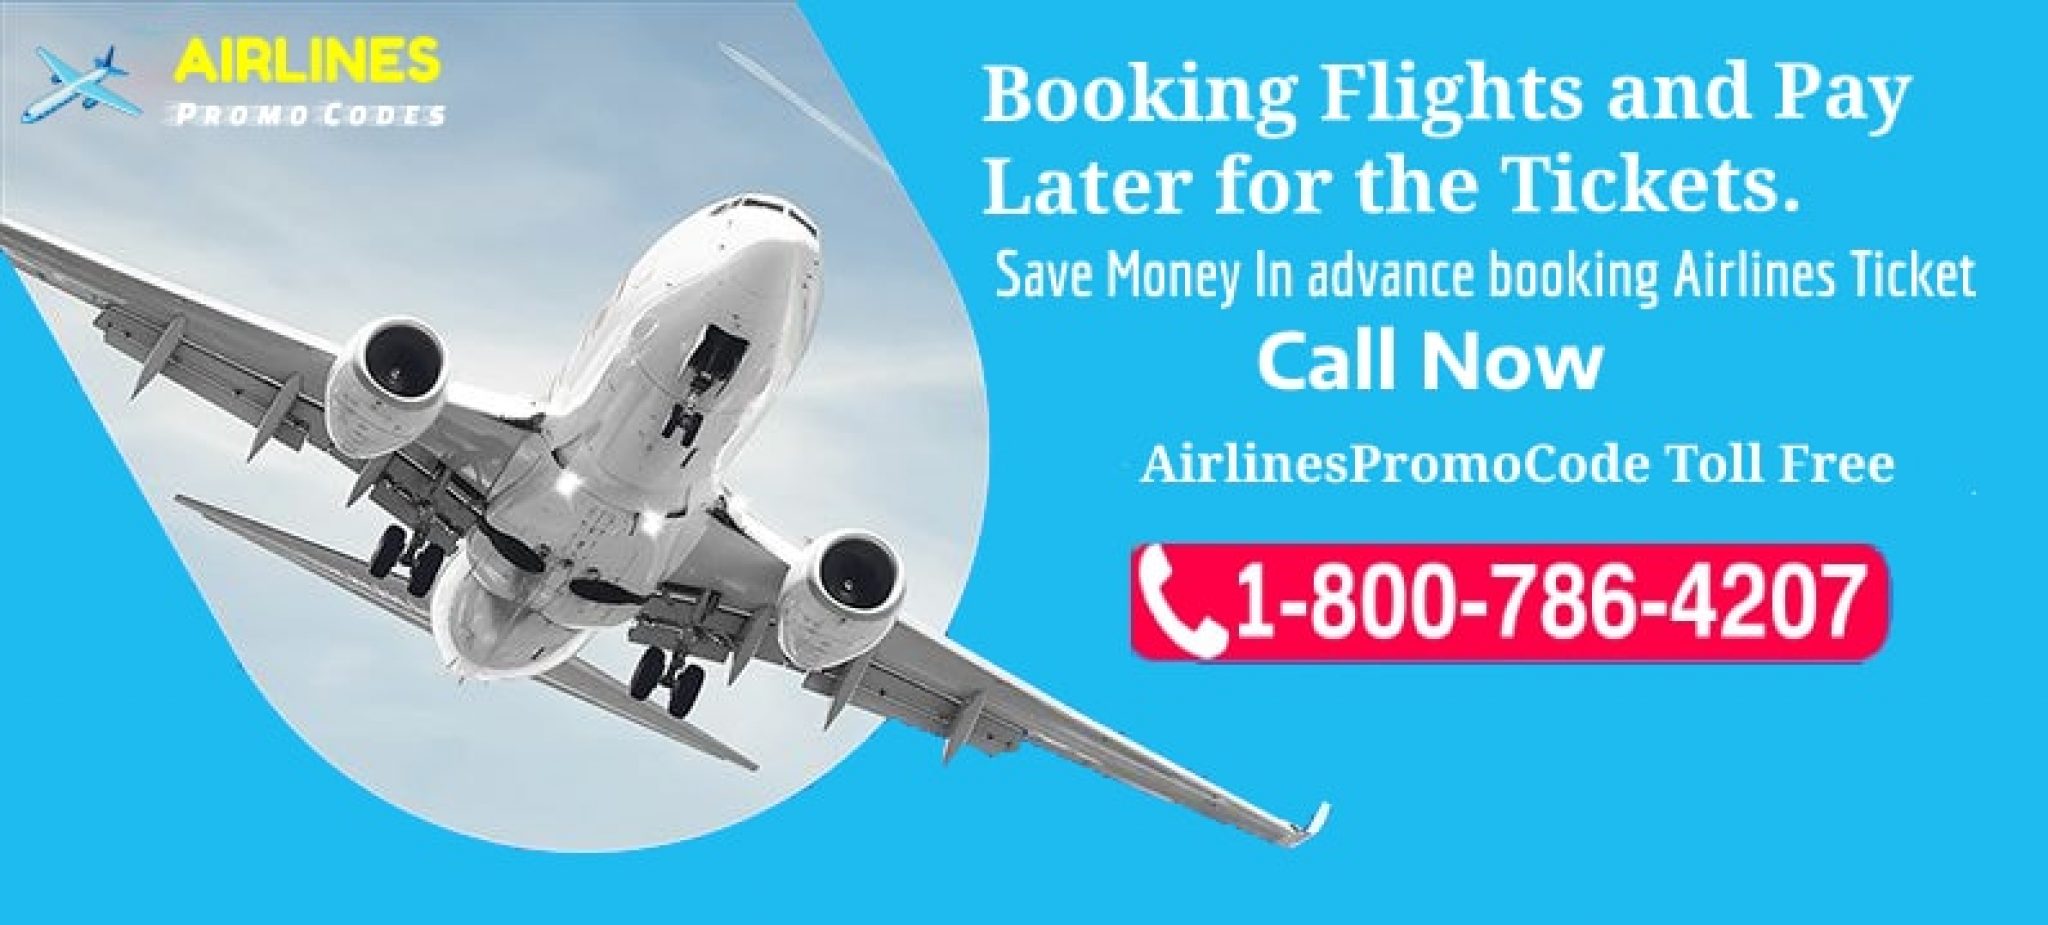 book flight pay later